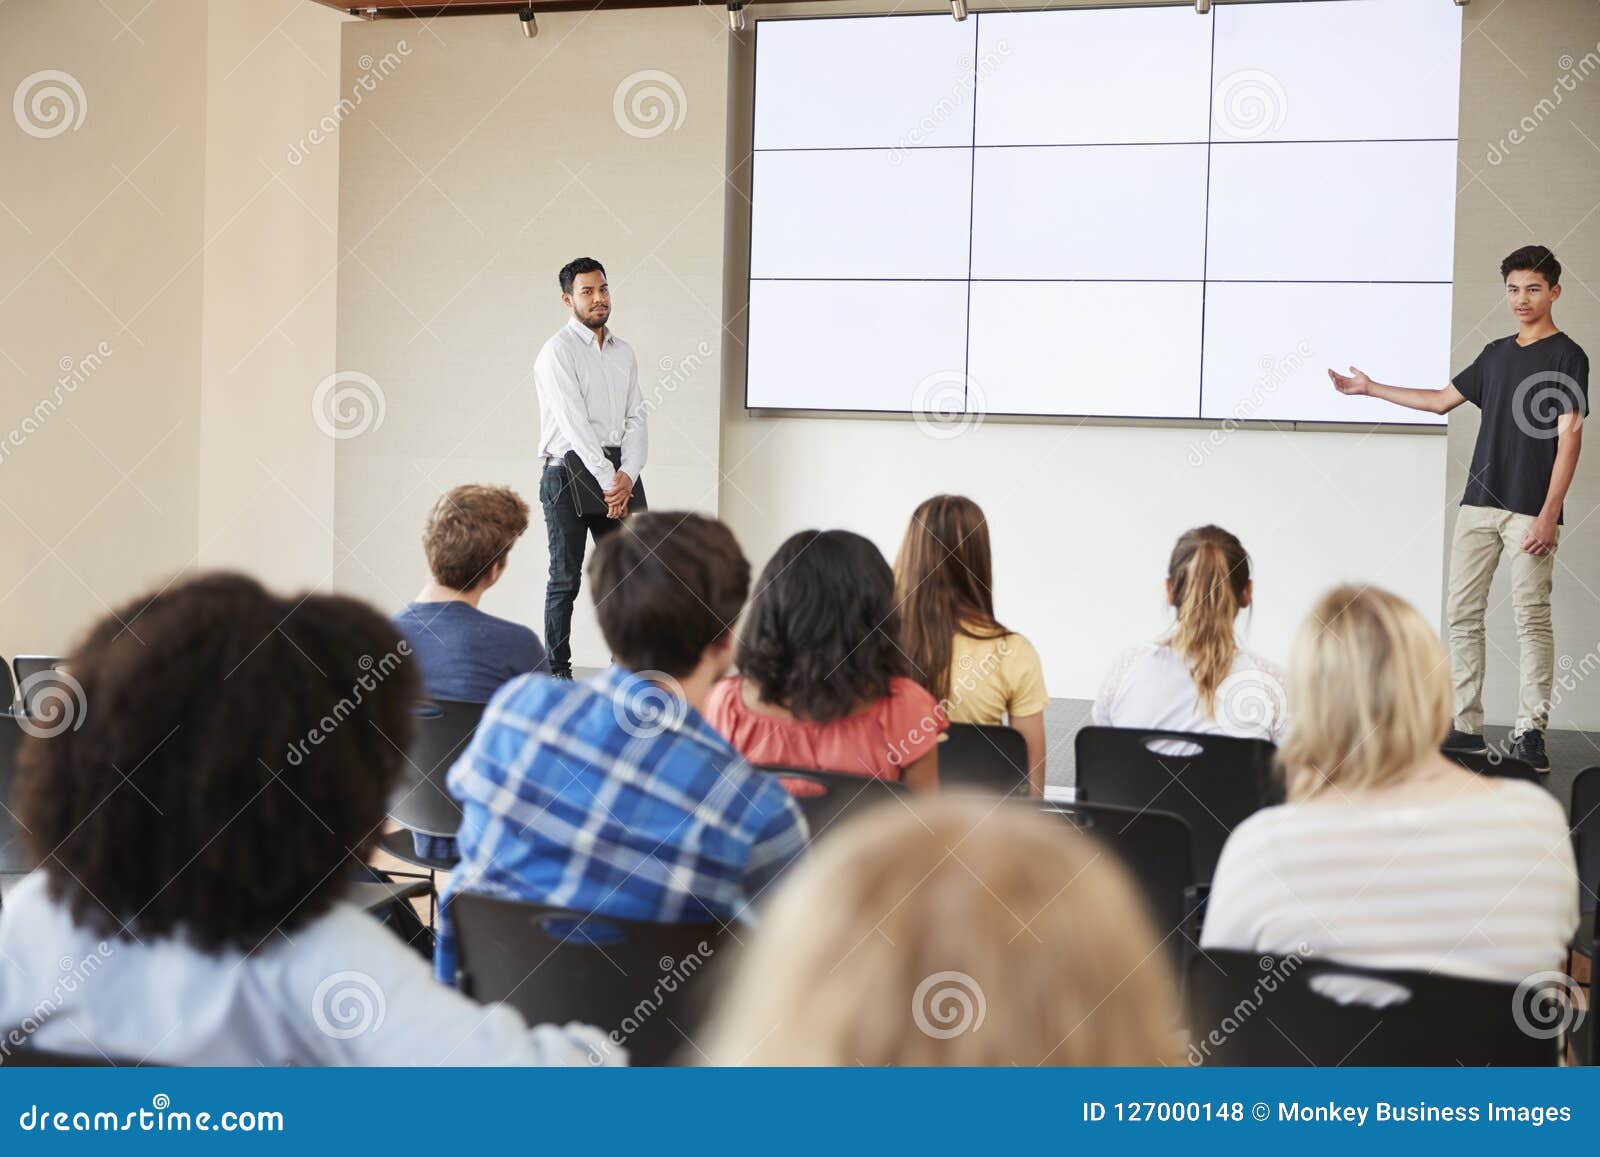 Male Student Giving Presentation To High School Class In Front Of